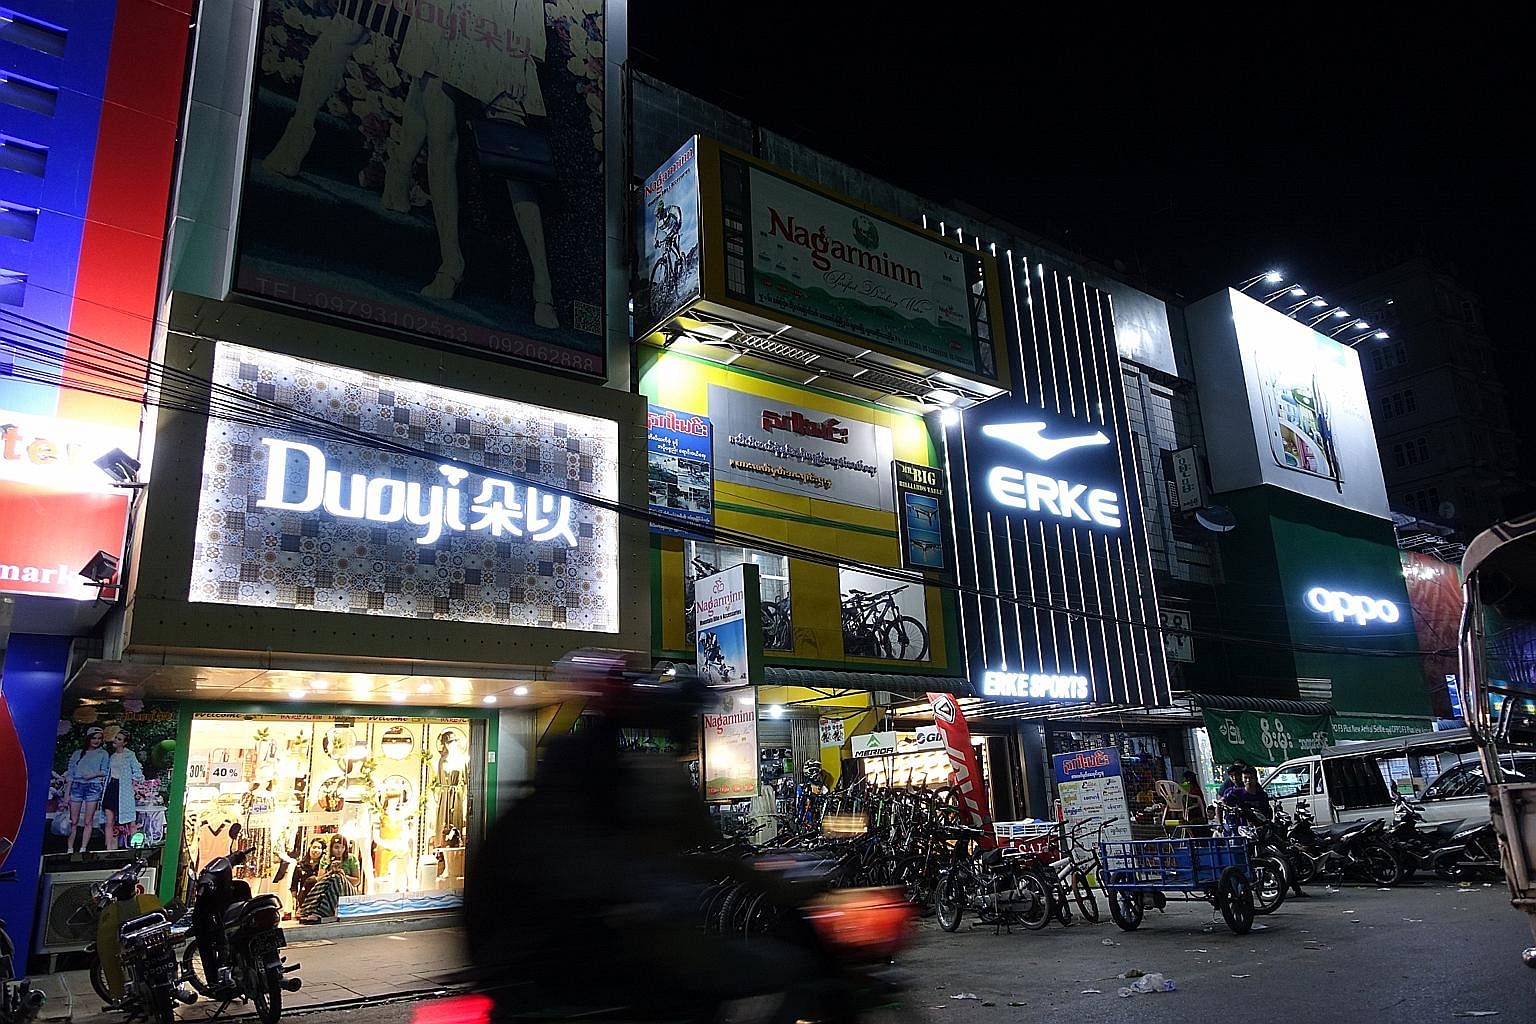 Advertisements for Chinese brands light up downtown Mandalay. The former royal capital, once lined with traditional wooden homes, now bustles with hotpot restaurants and Chinese boutiques selling Duoyi women's fashion, Erke sportswear and Oppo smartp